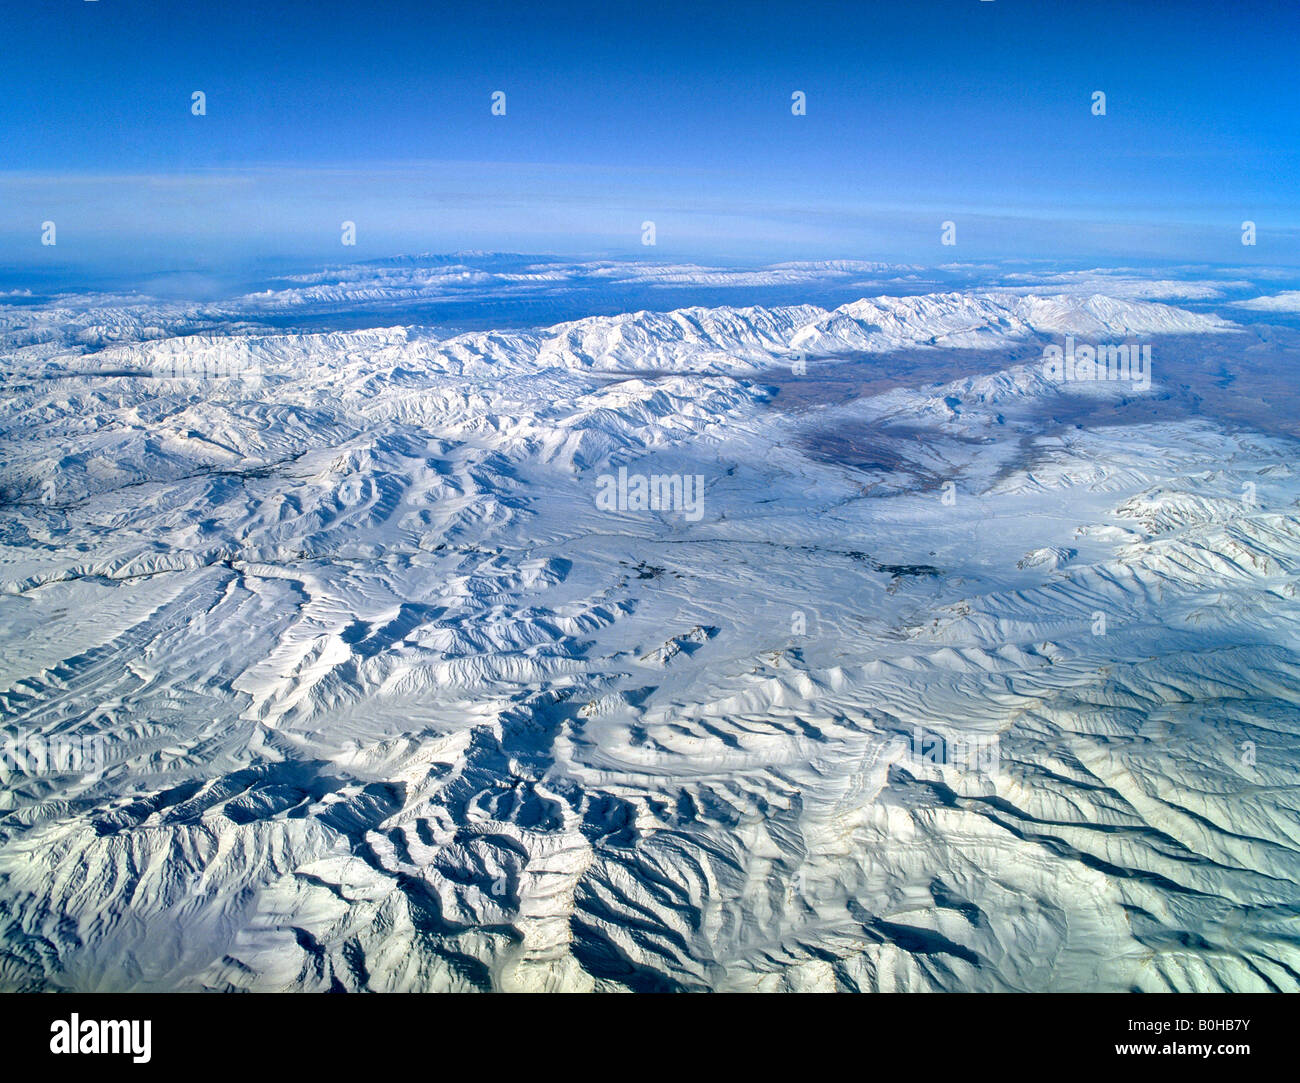 Iran, aerial view from an elevation of 10 000 metres, plateau, mountains, Iran Stock Photo